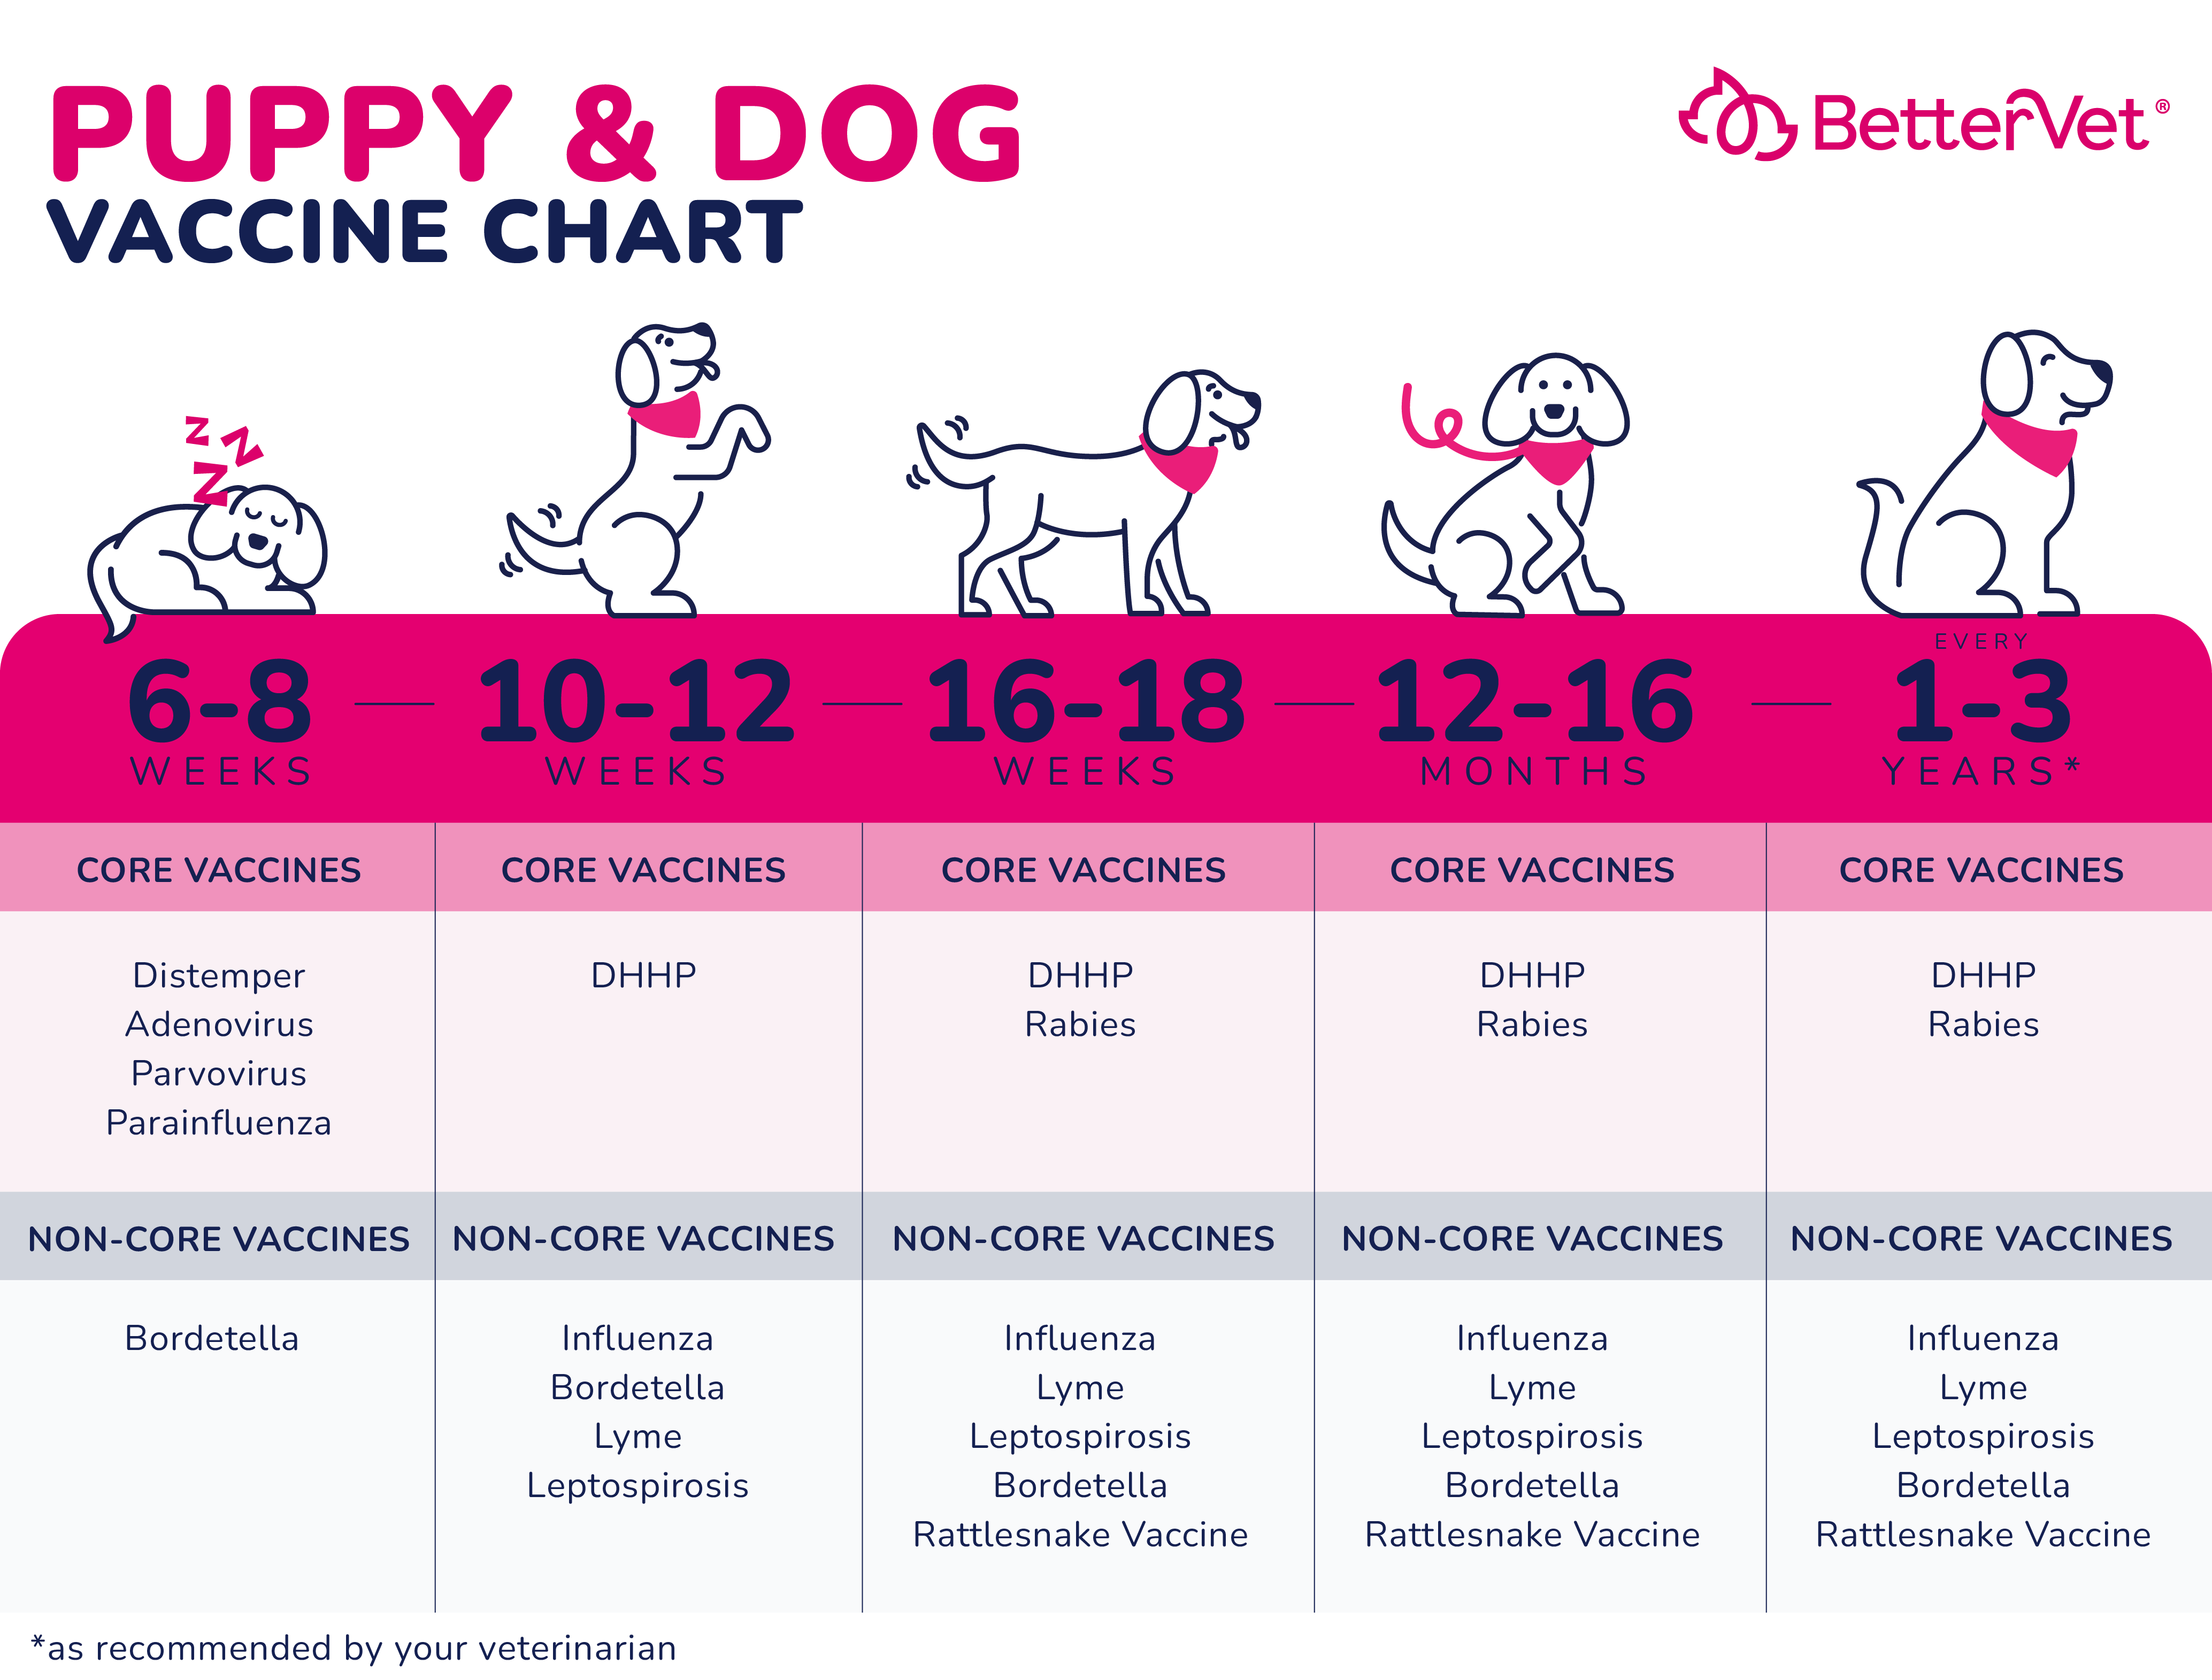 An infographic showcasing the appropriate vaccination schedule for both dogs and puppies.